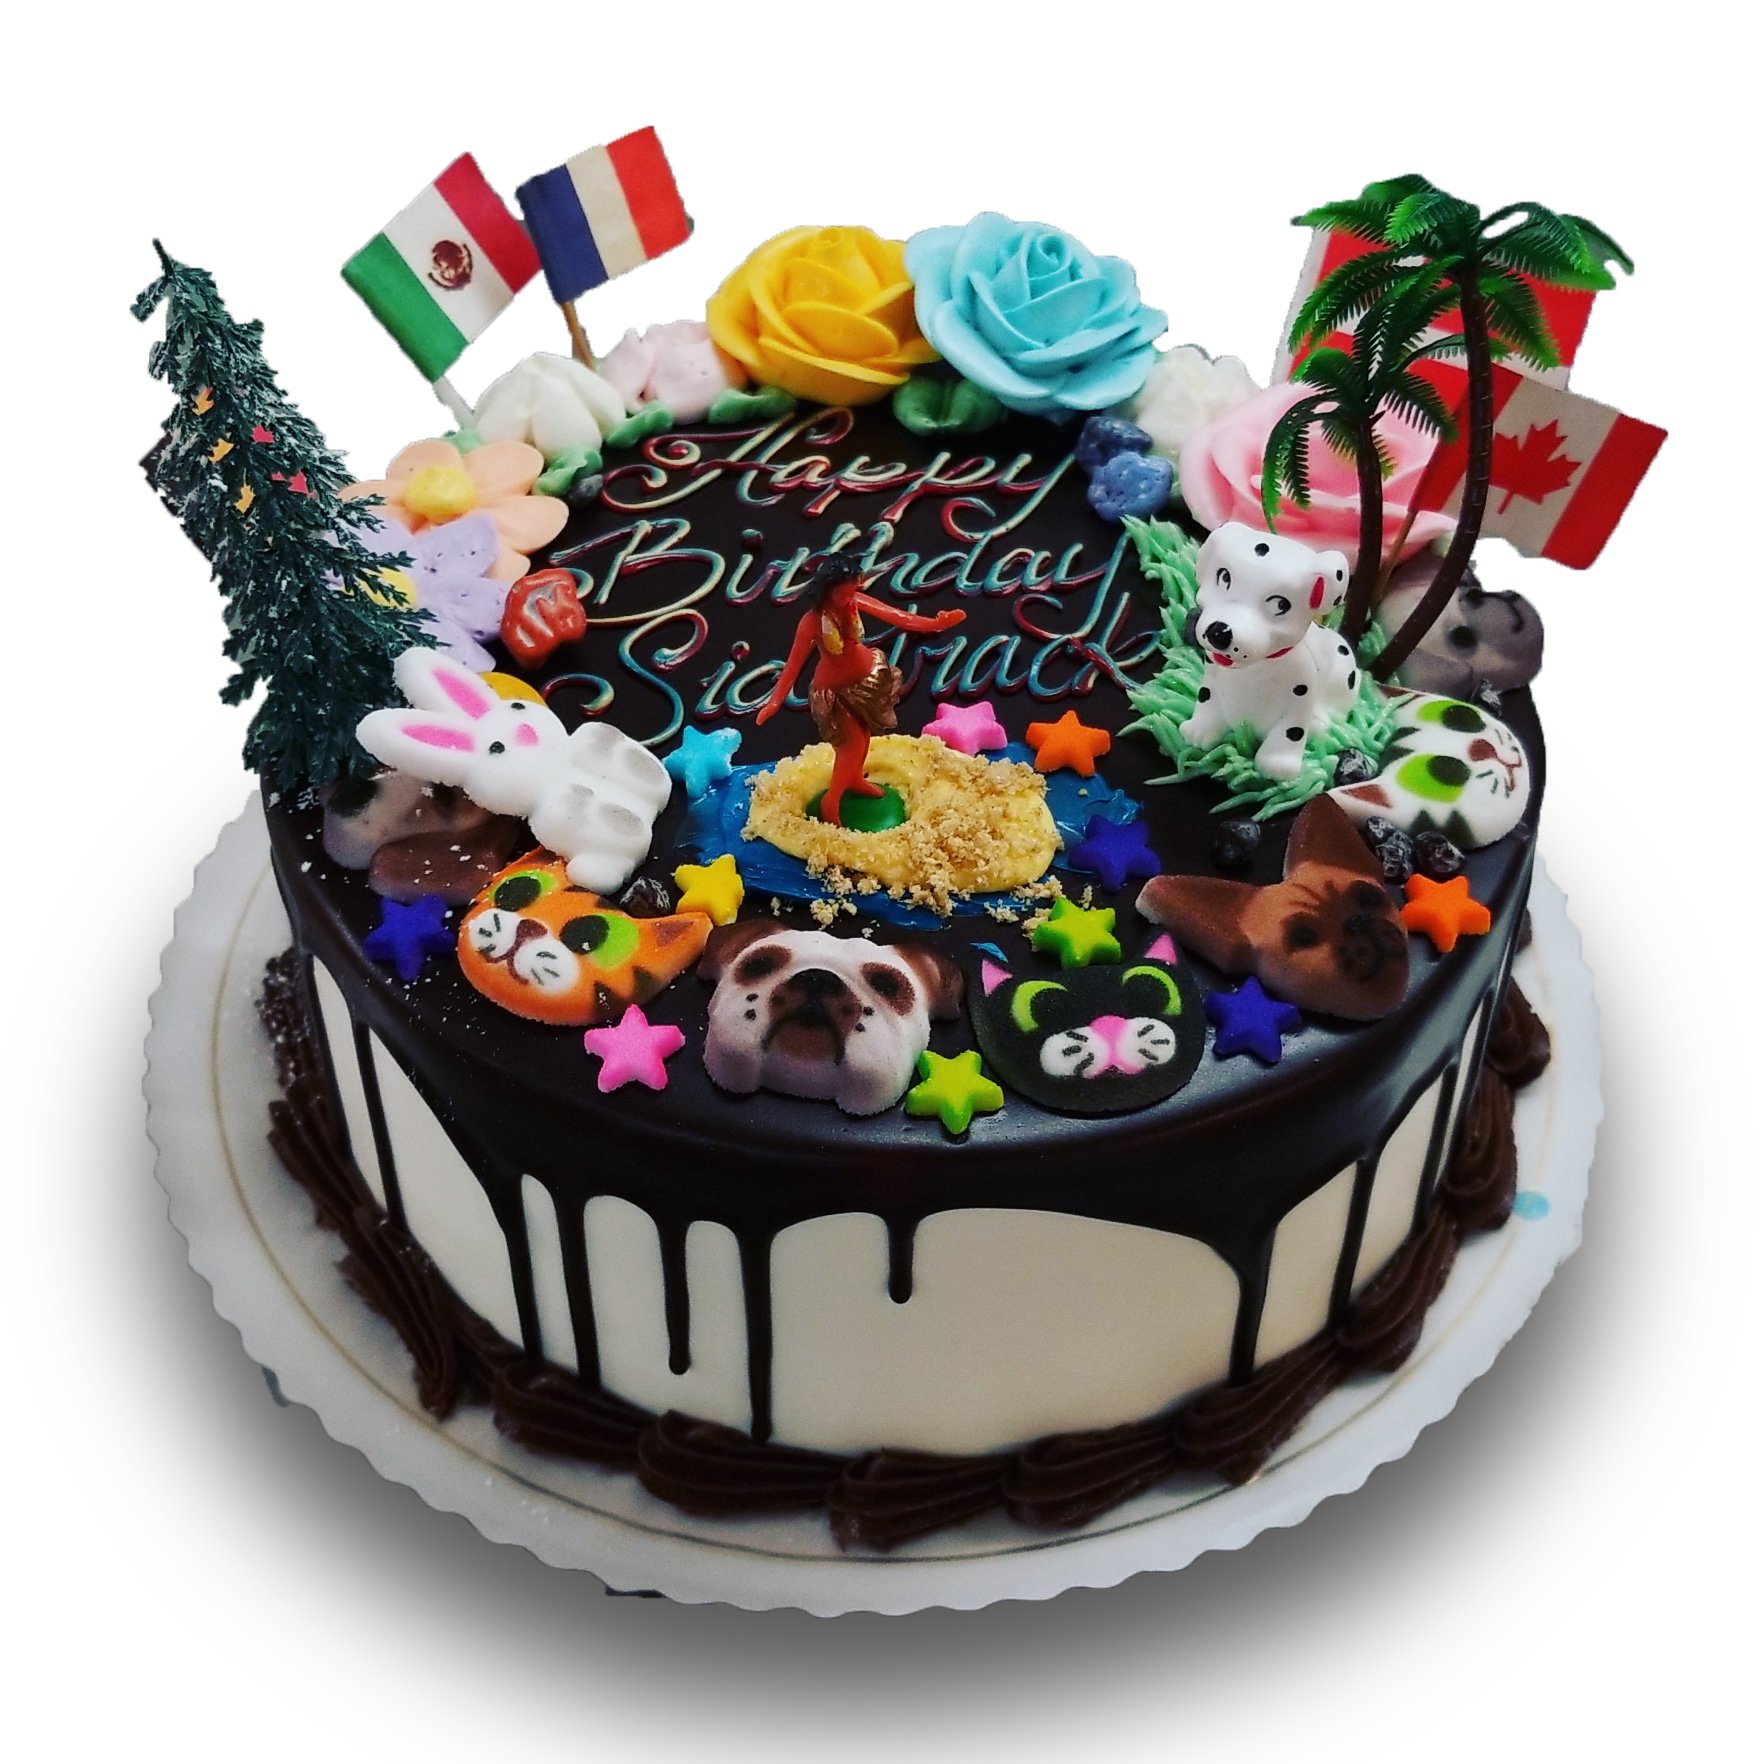 AB014A. fun and random birthday cake with flags, roses, animals and hula dancer